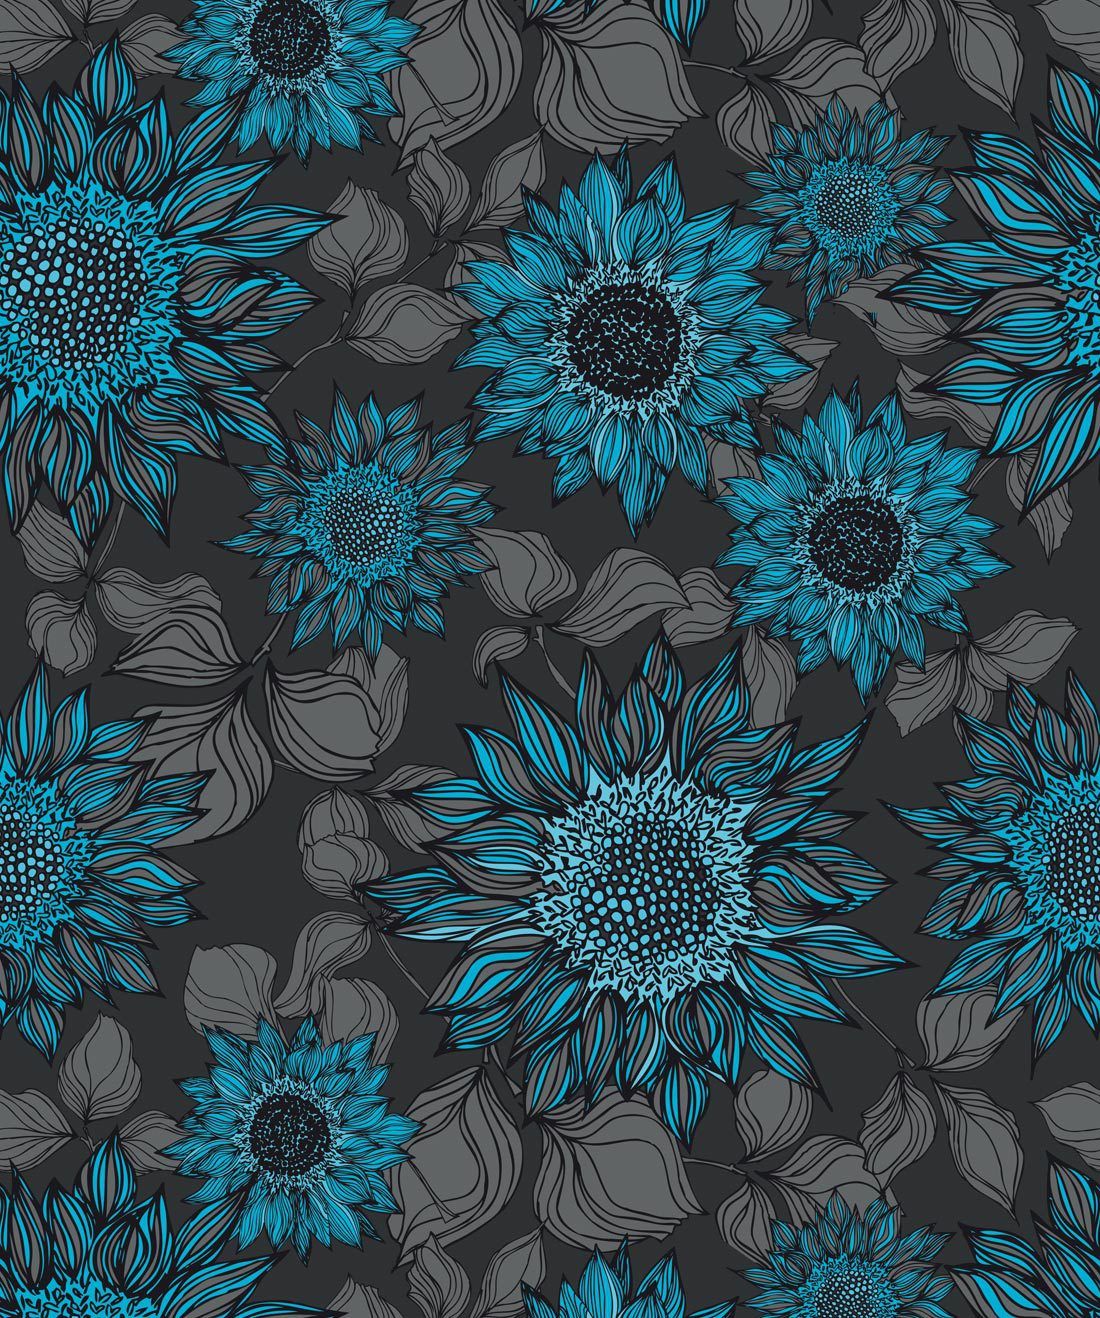 Beatrice is a black and blue floral wallpaper